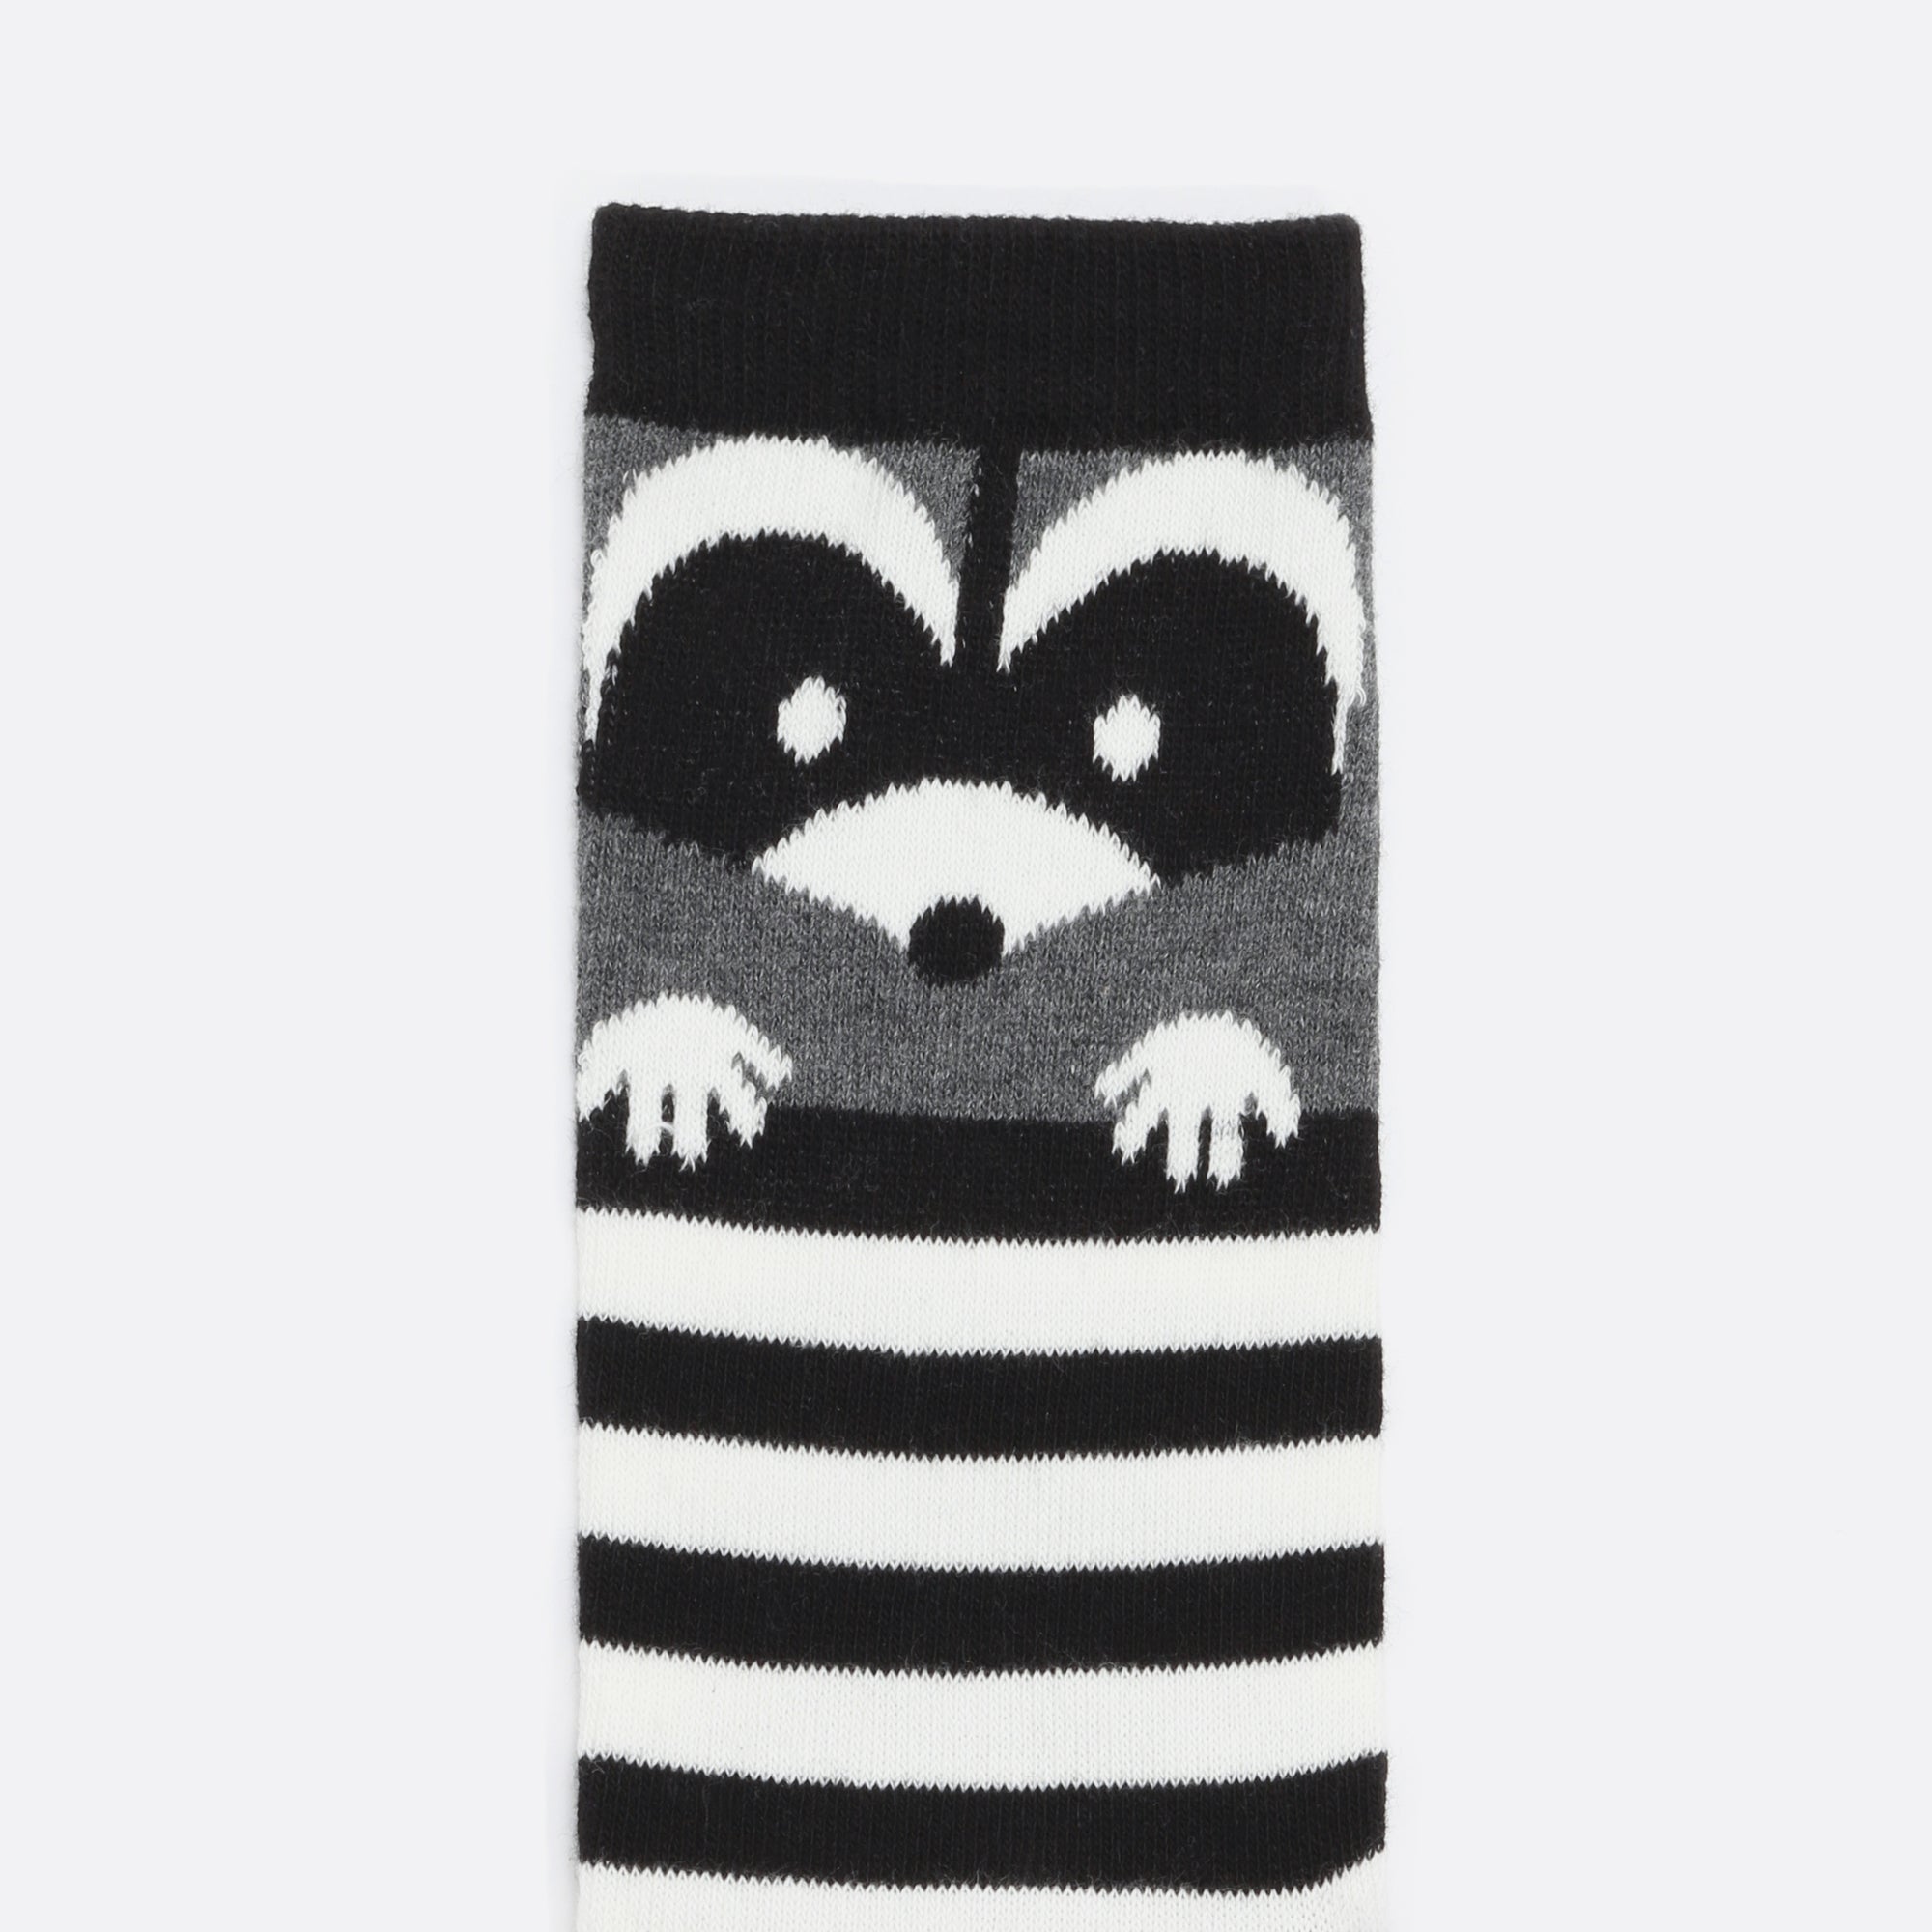 Black and white stripes socks with raccoon